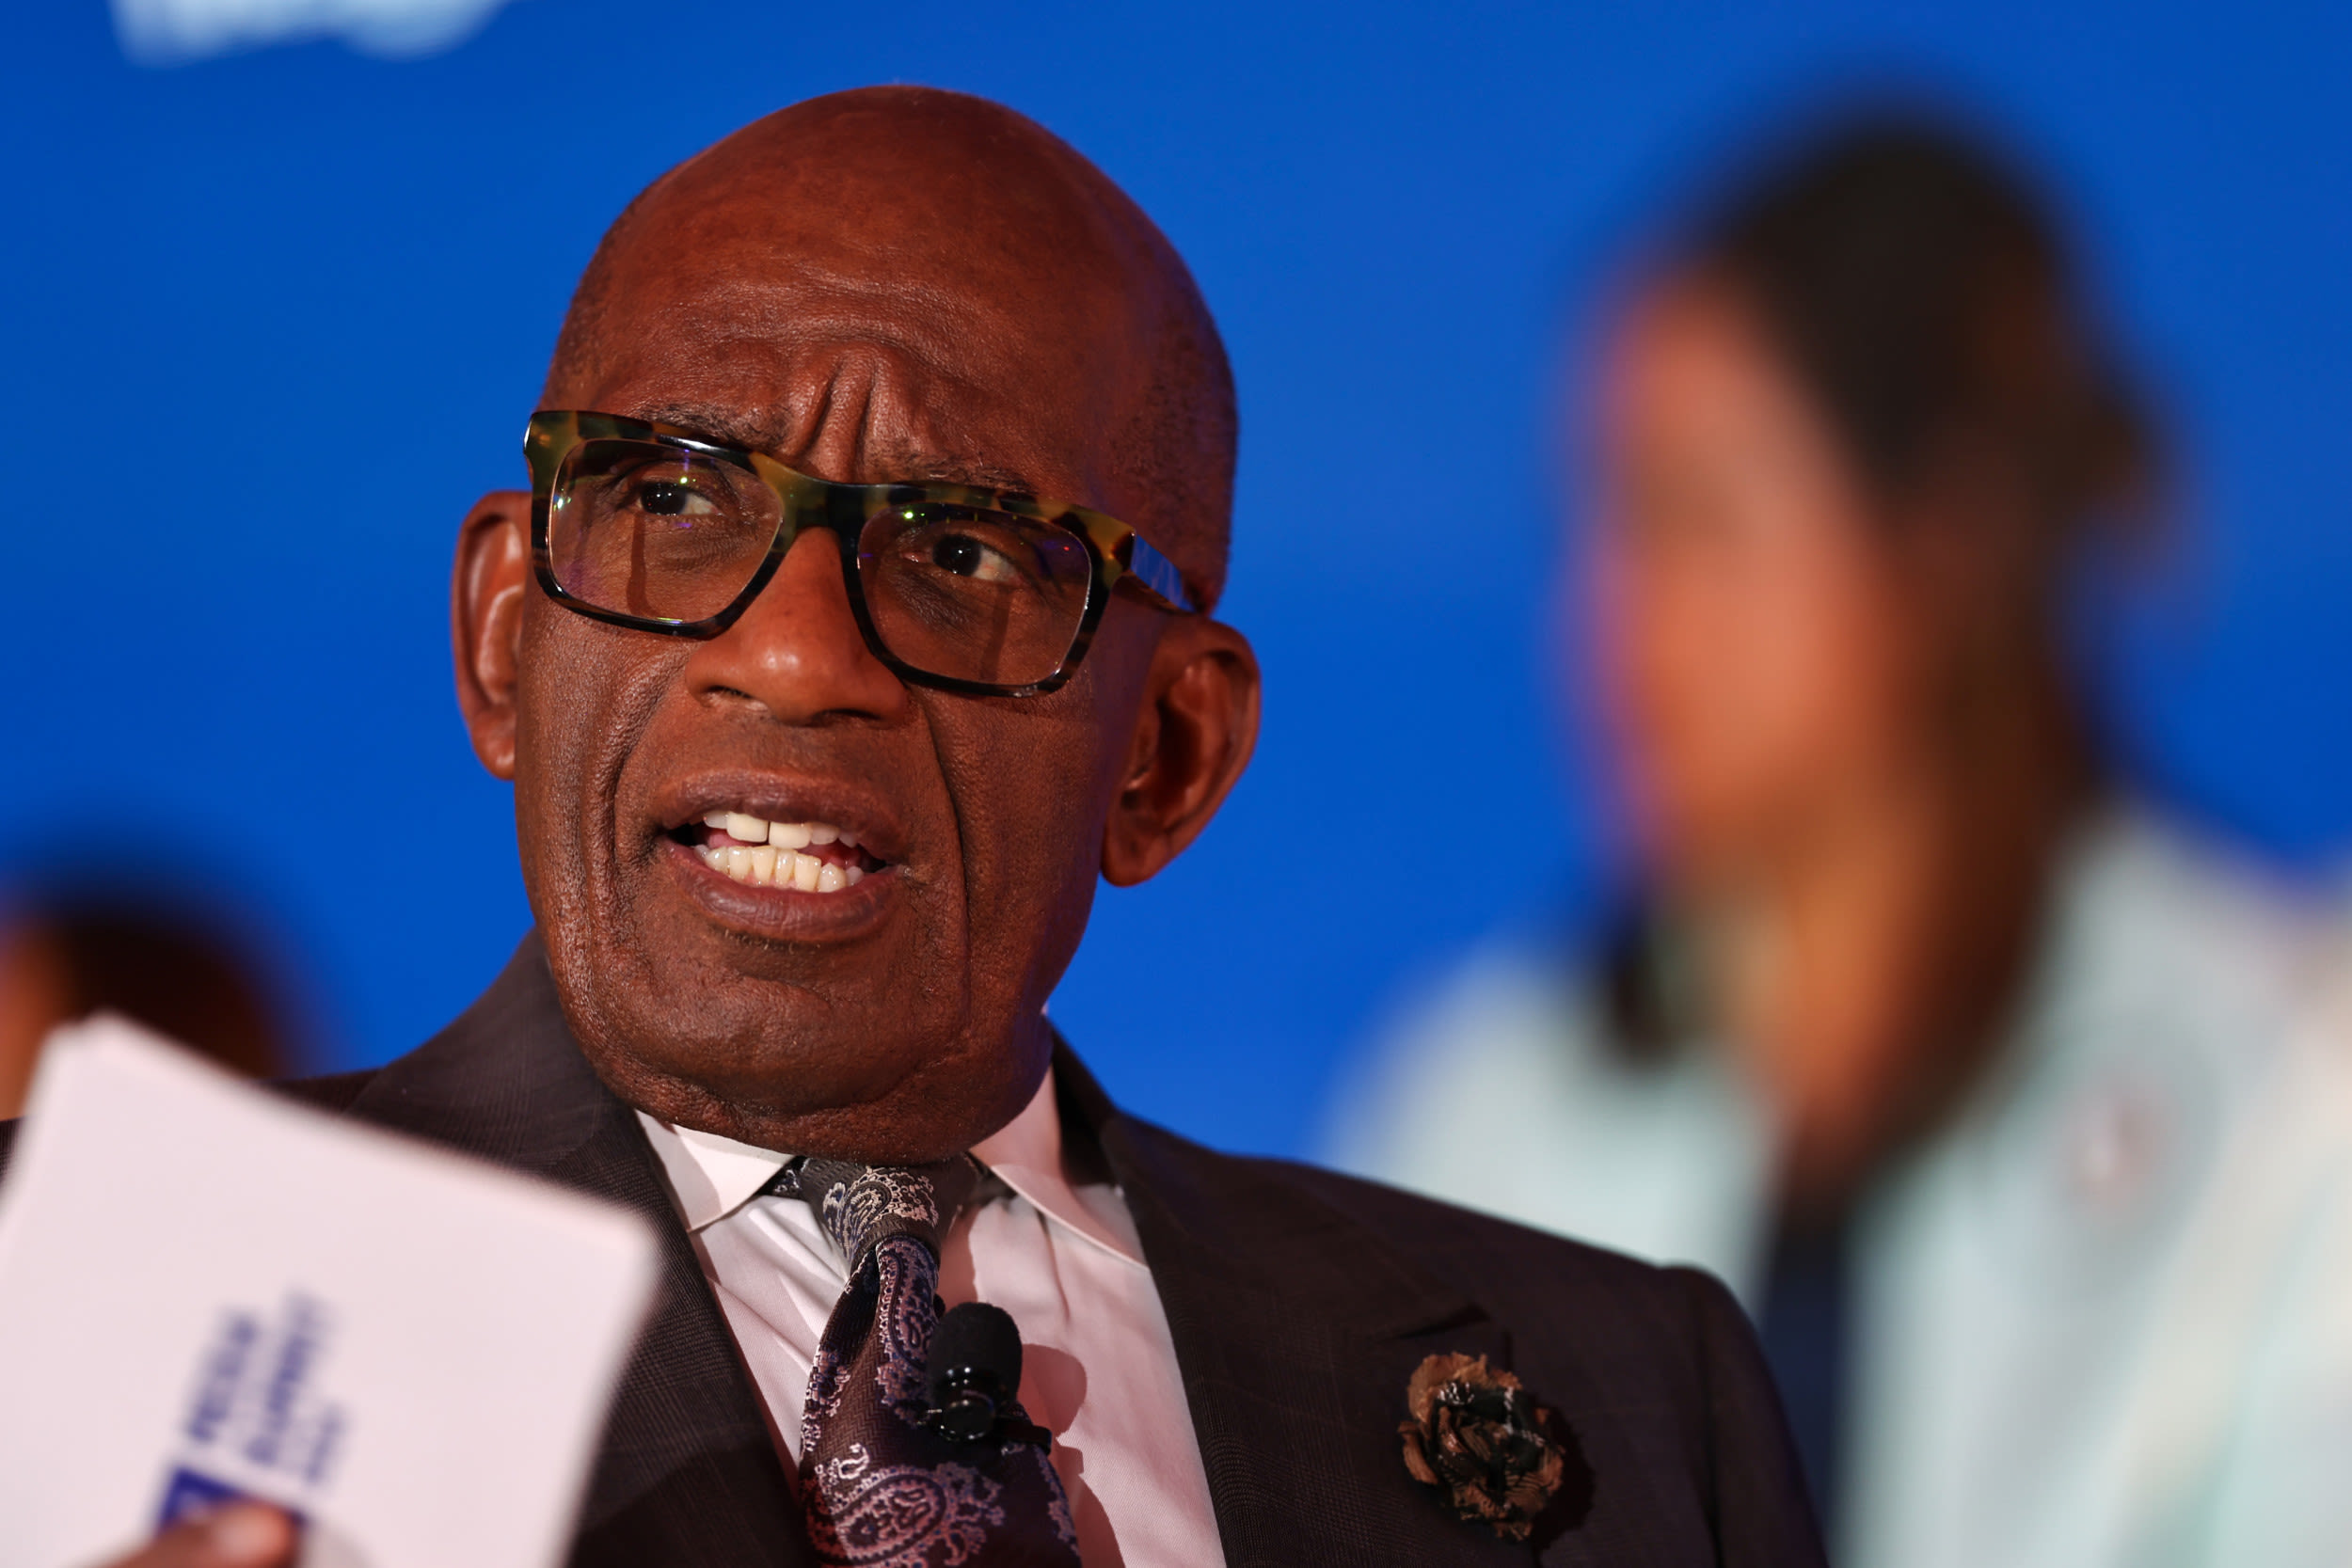 Al Roker's Daughter Leila Makes 'Today' Show Appearance in Paris